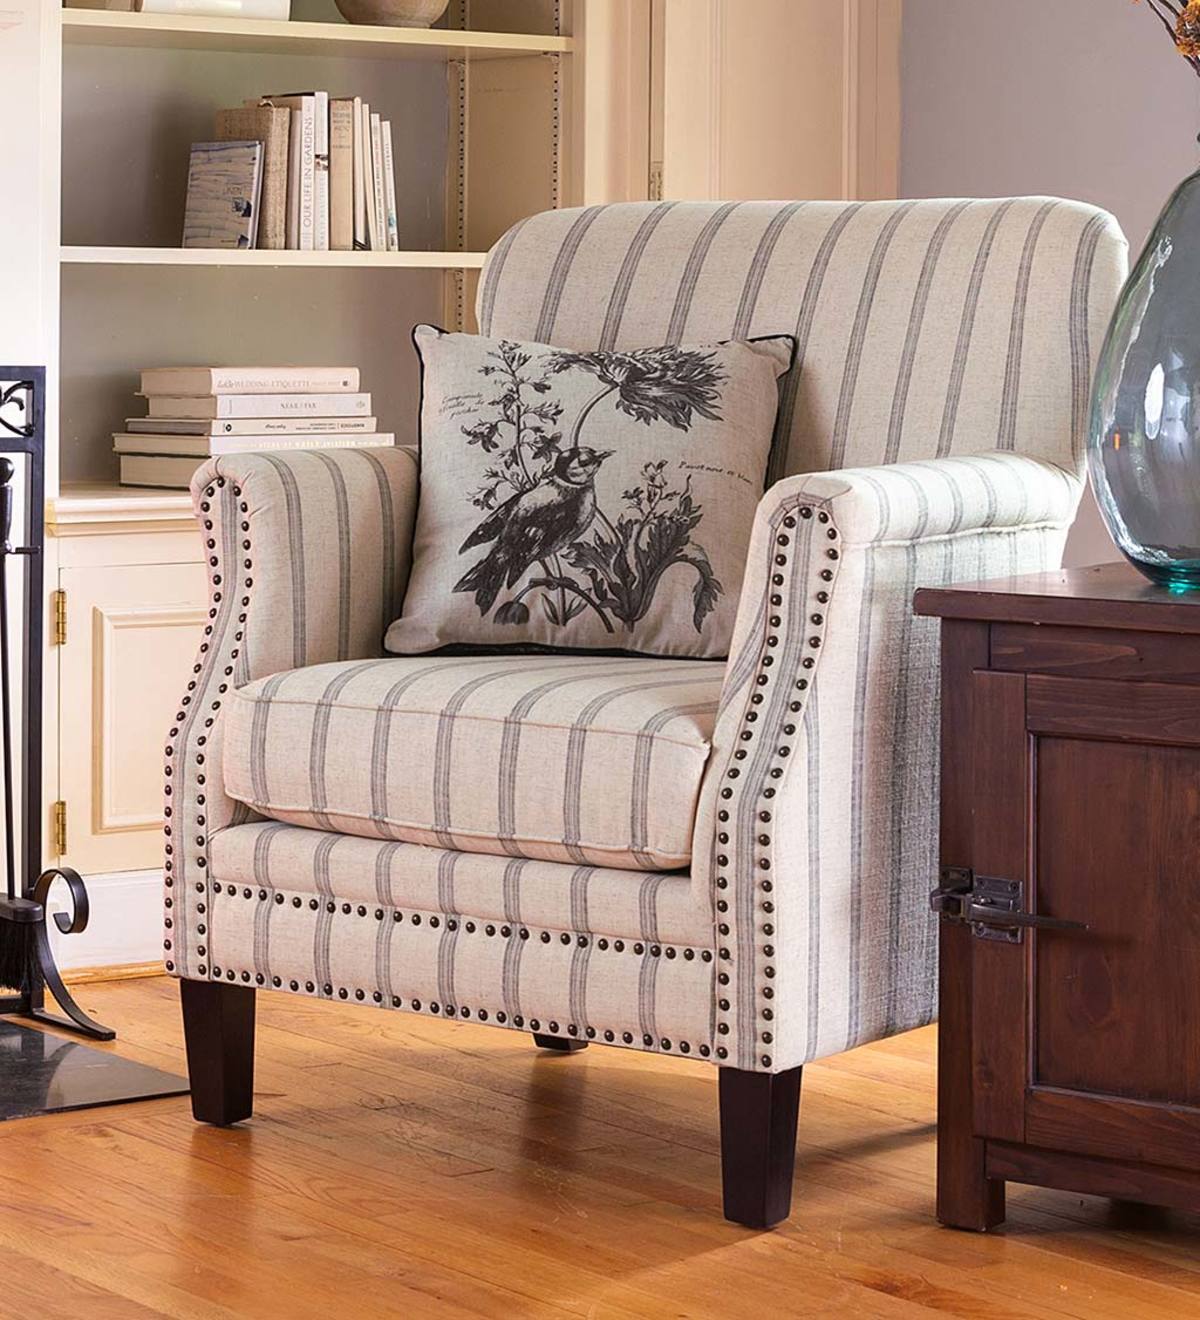 Classic Ticking Stripe Upholstered Club Chair